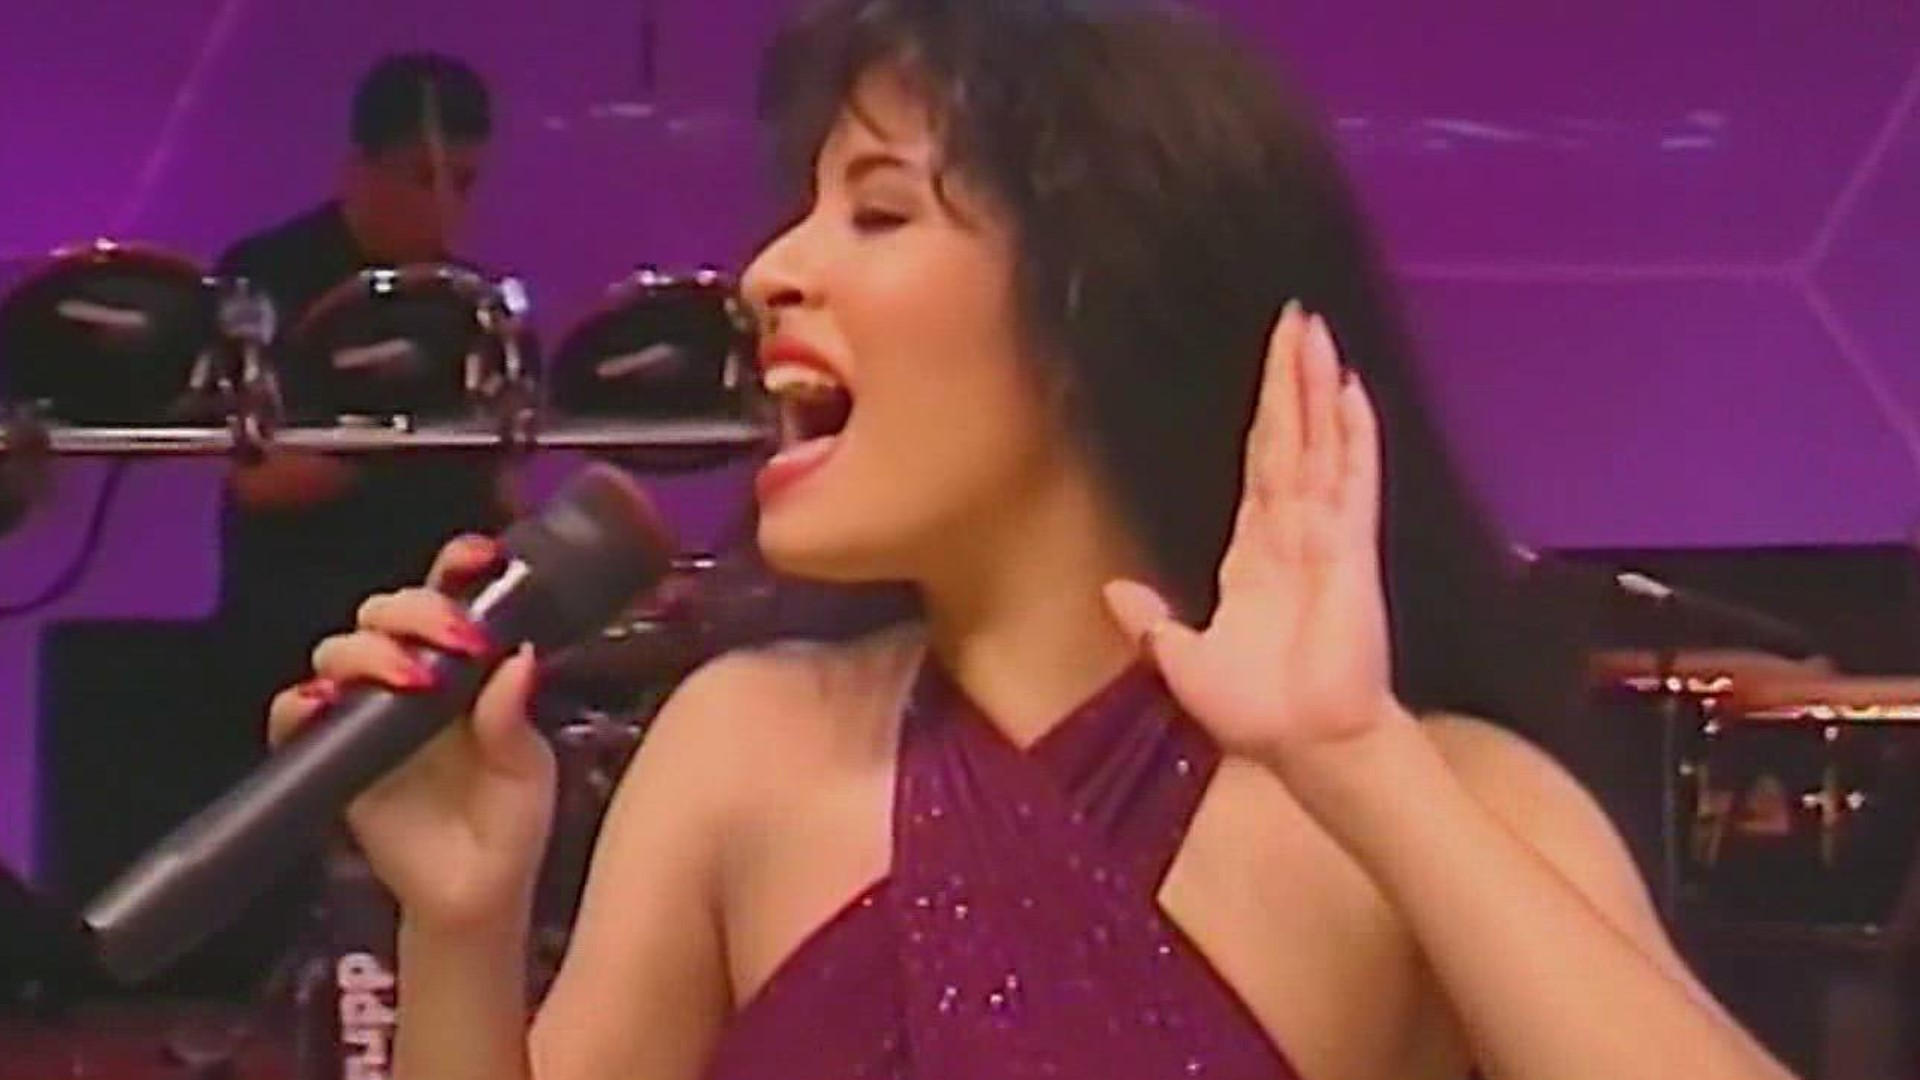 Today is national Selena day, celebrating the queen of Tejano on what would have been her 51st birthday.